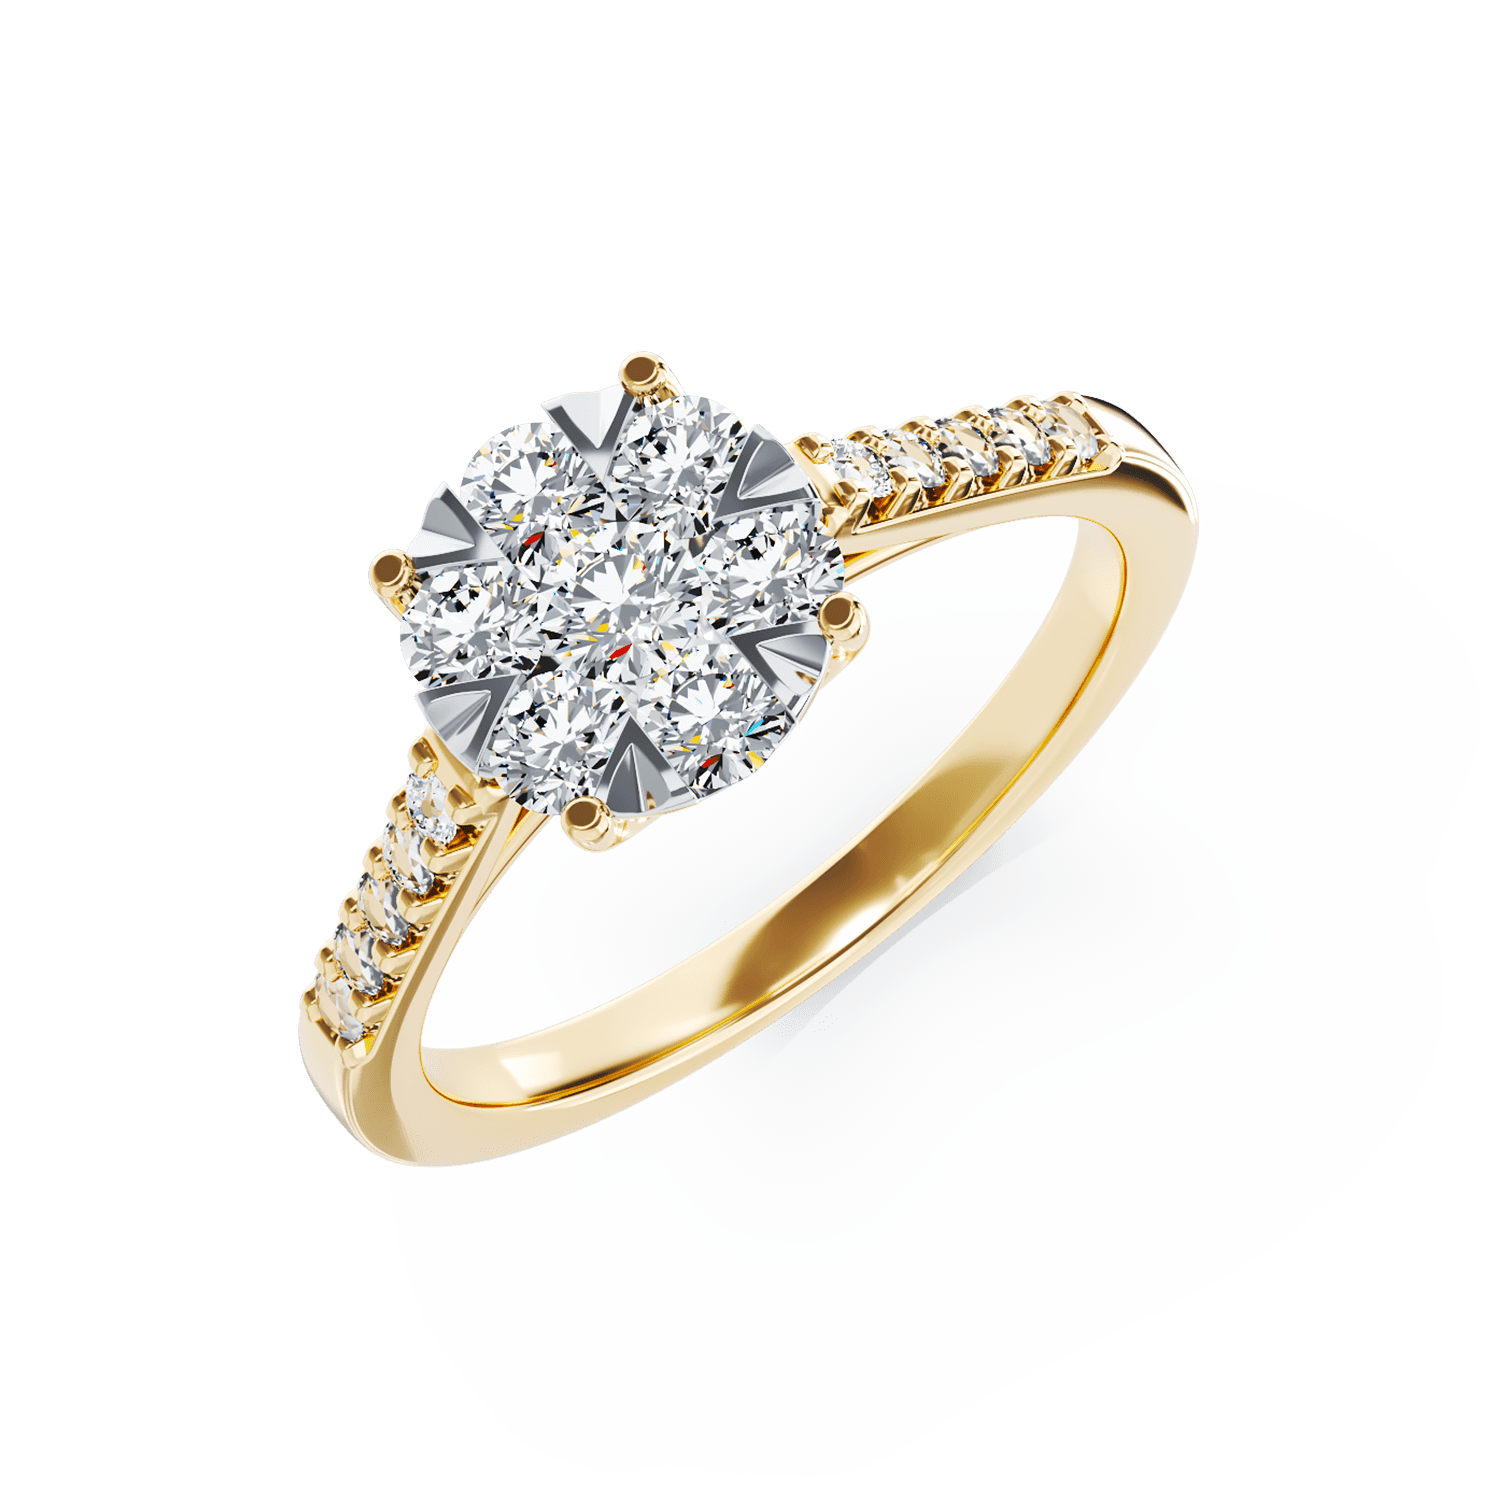 18K yellow gold engagement ring with 0.5ct diamonds